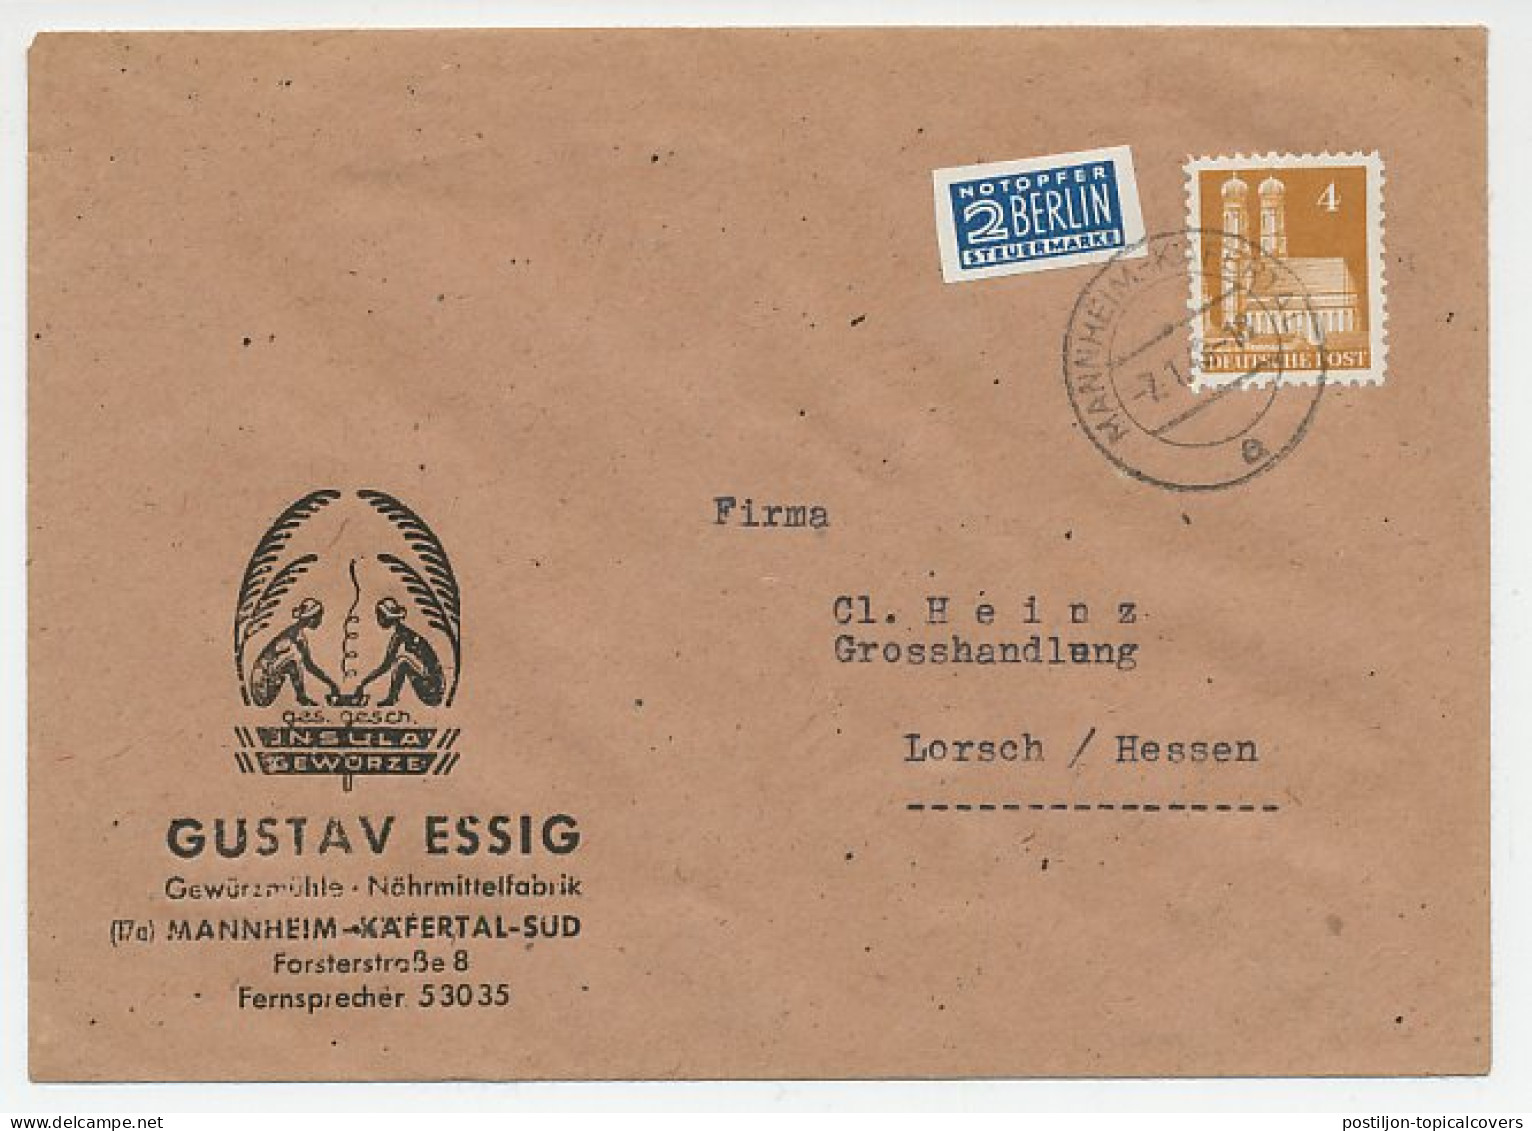 Illustrated Cover Deutsche Post / Germany 1949 Insula - Island - Spices - Indianer